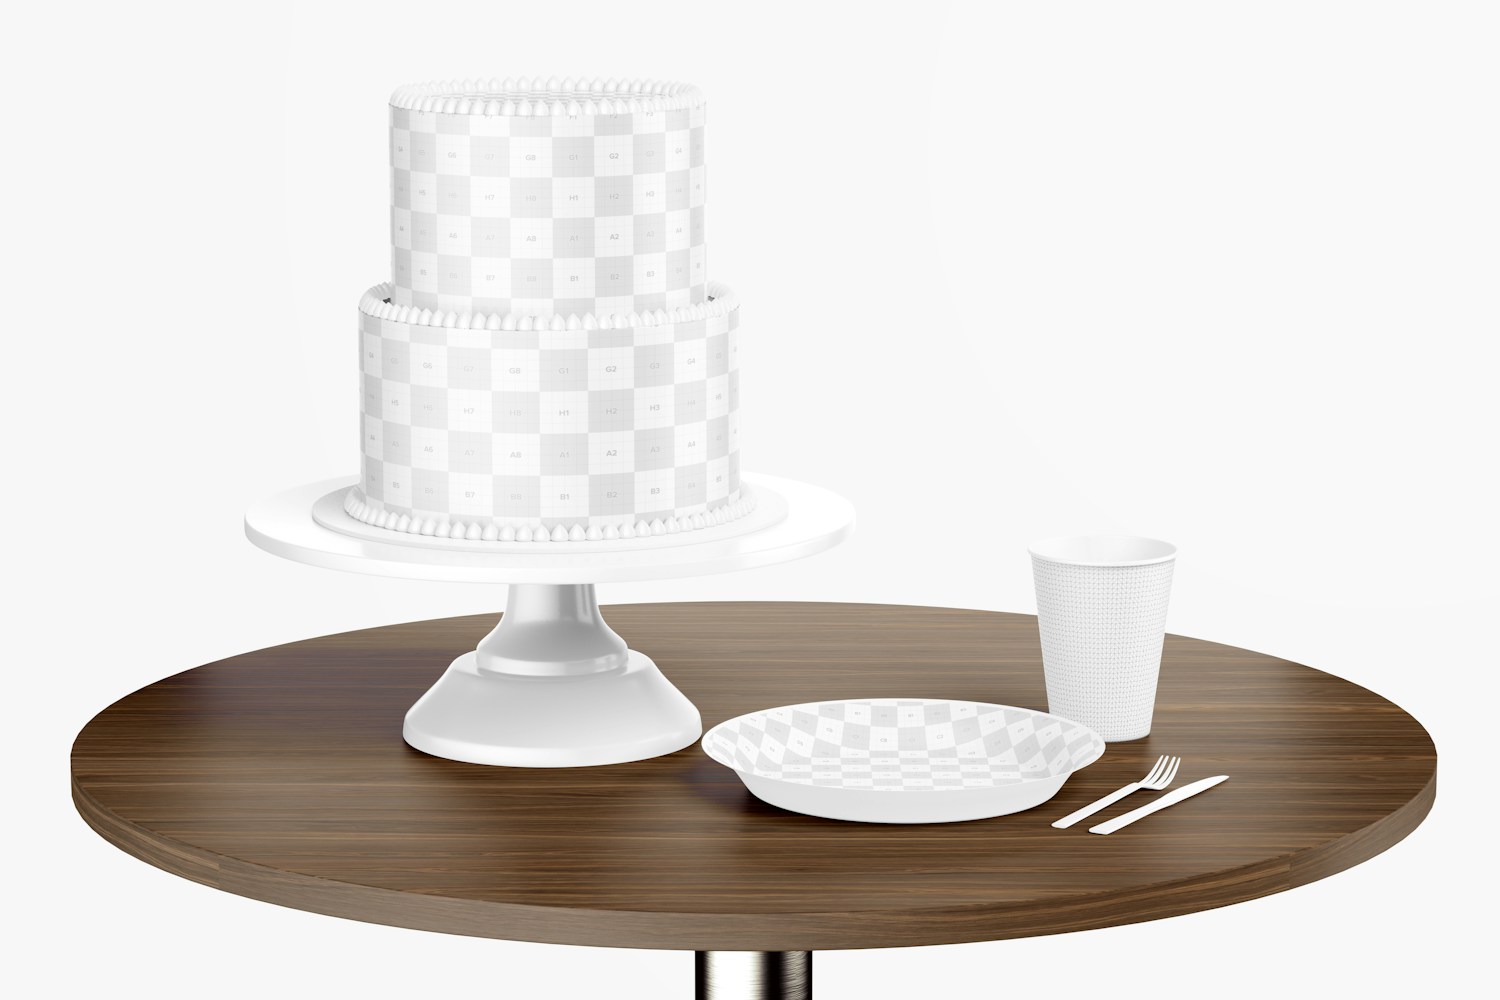 Two Tier Cake on Table Mockup